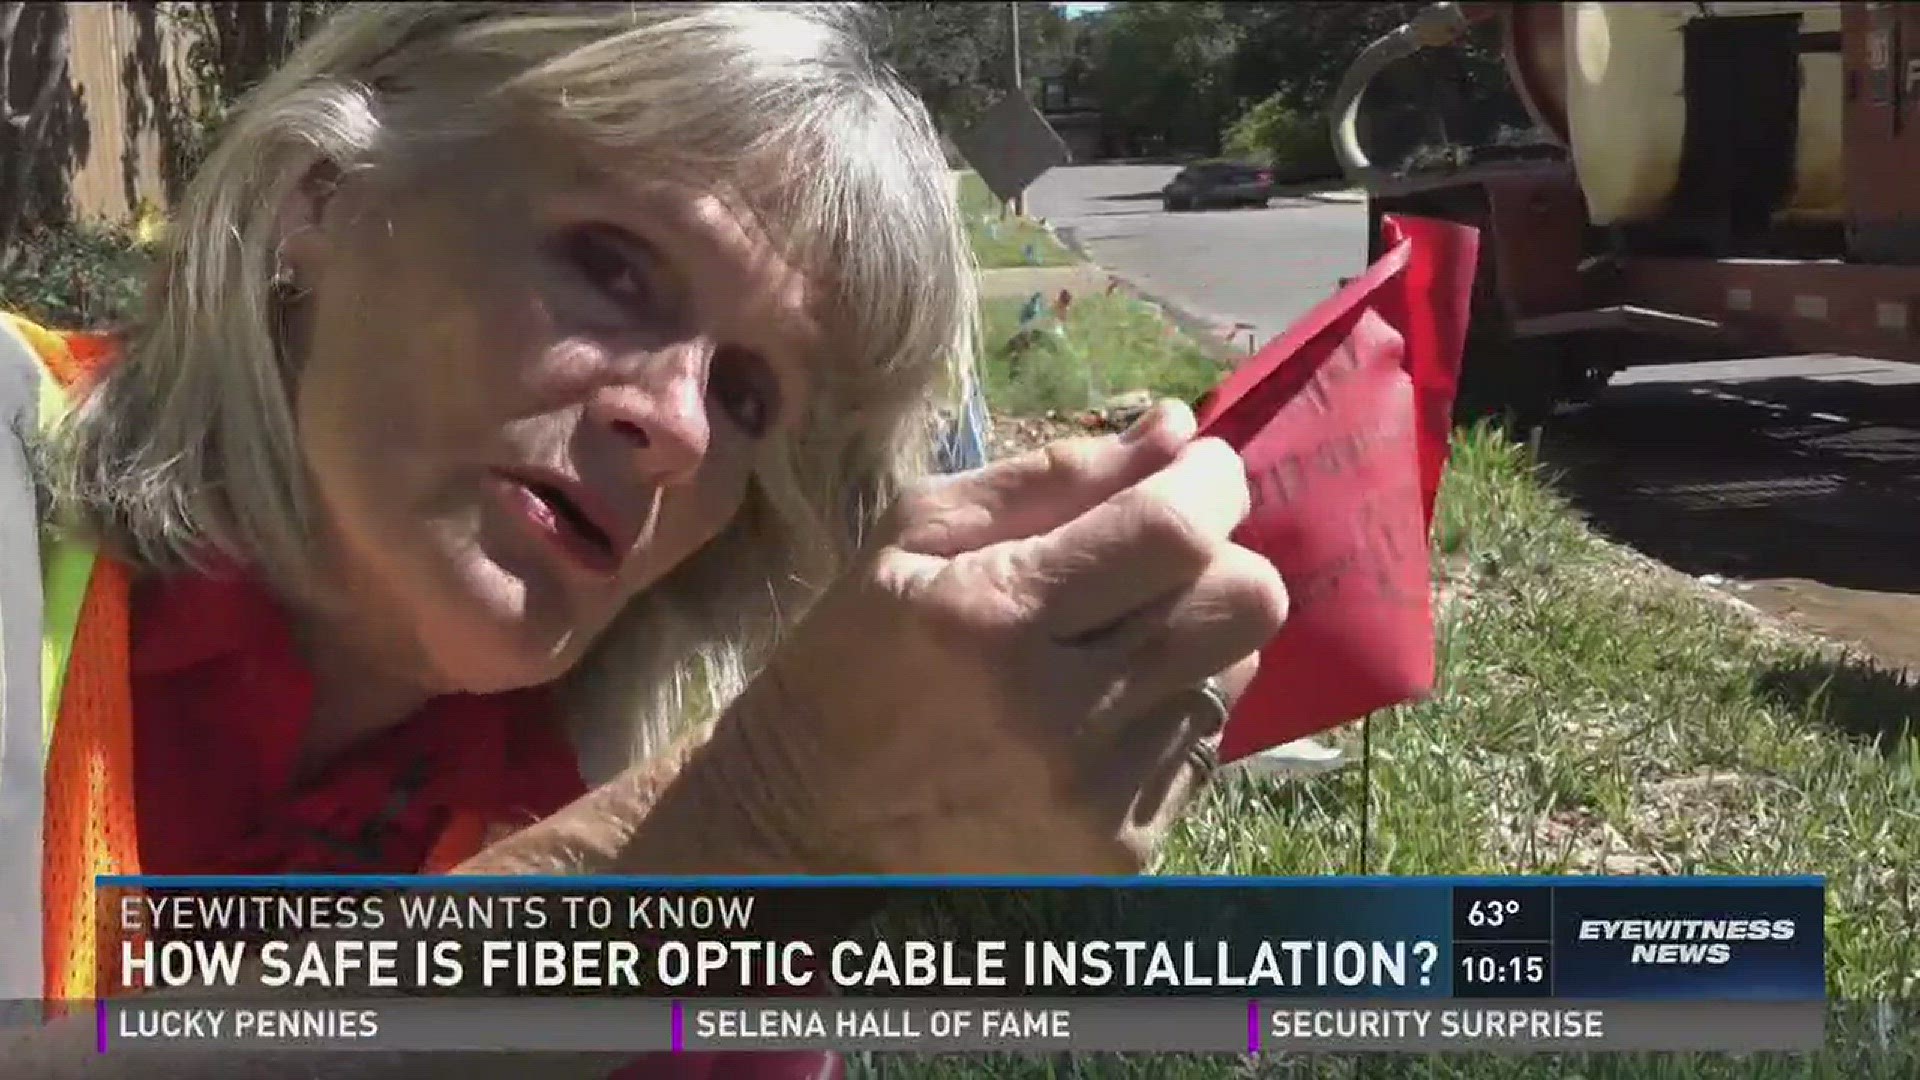 EWTK: How safe is fiber optic cable installation?